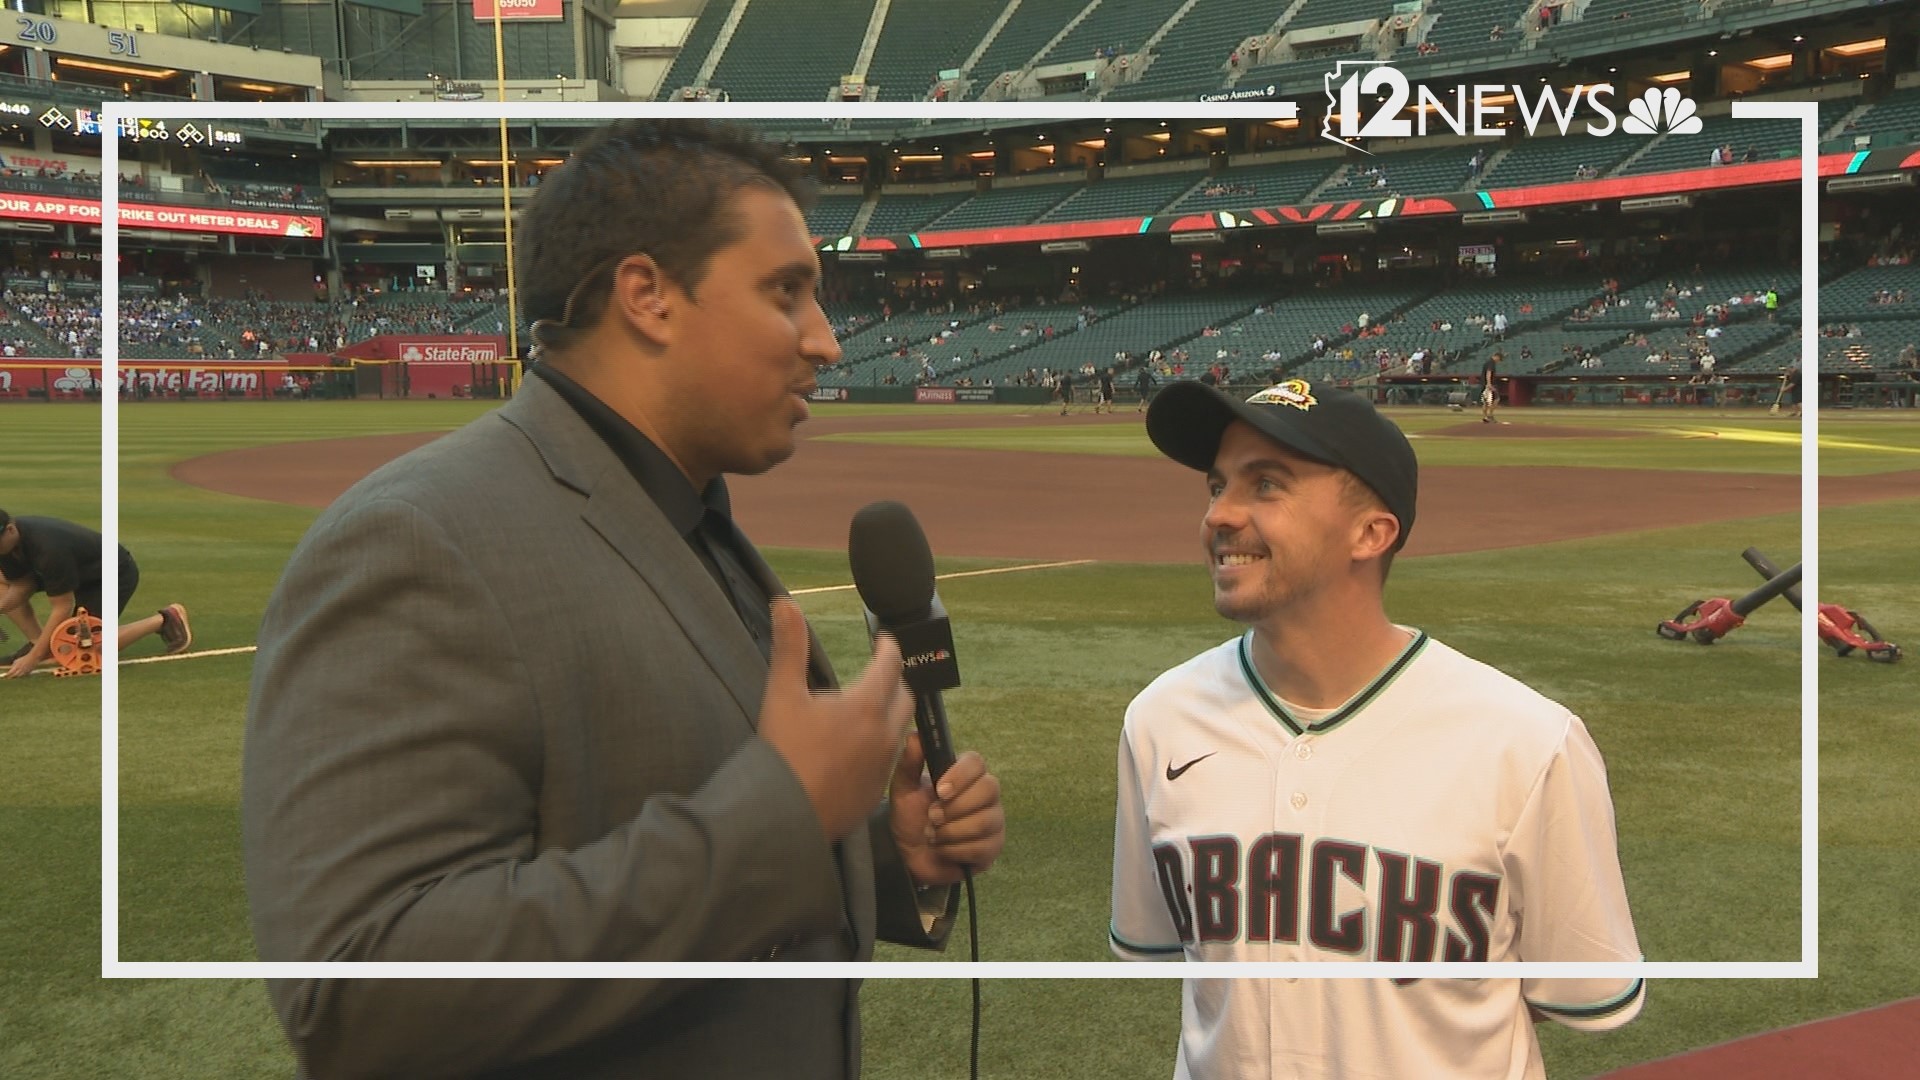 NASCAR Night at Chase Field brought out some big names, including Frankie Muniz, who has spent the past year racing. 12Sports spoke with Muniz at the game